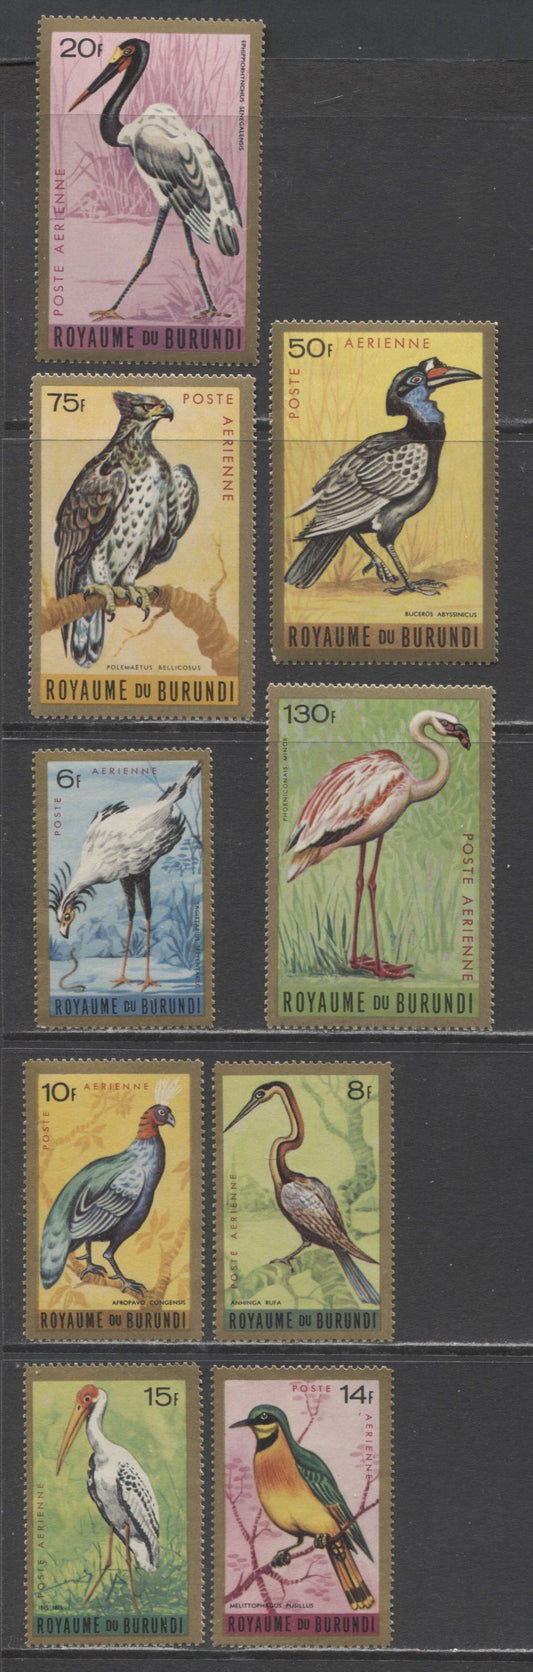 Lot 97 Burundi SC#C8-C16 1965 Airmail Bird Definitives, 9 VFOG Singles, Click on Listing to See ALL Pictures, 2017 Scott Cat. $19.9